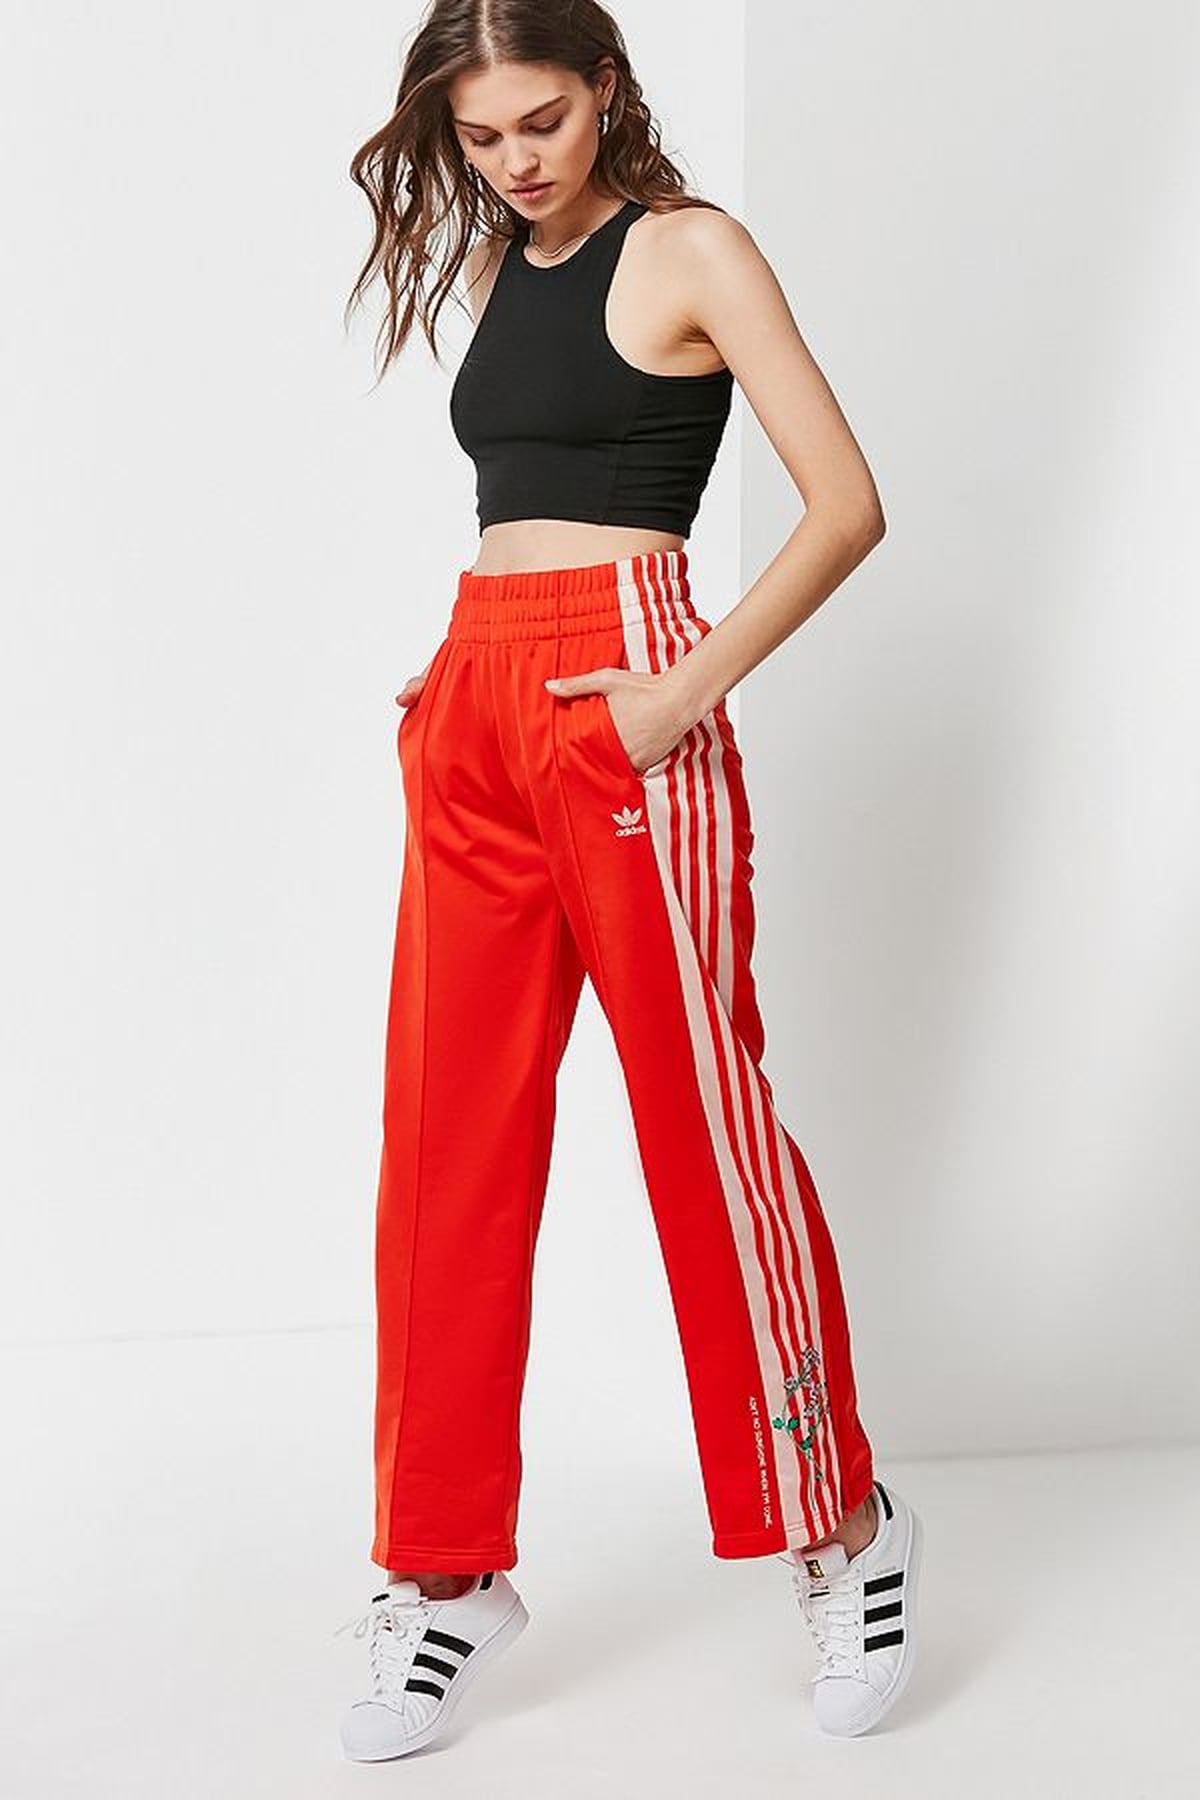 How Street Style Stars and Celebrities Wear Track Pants | POPSUGAR Fashion